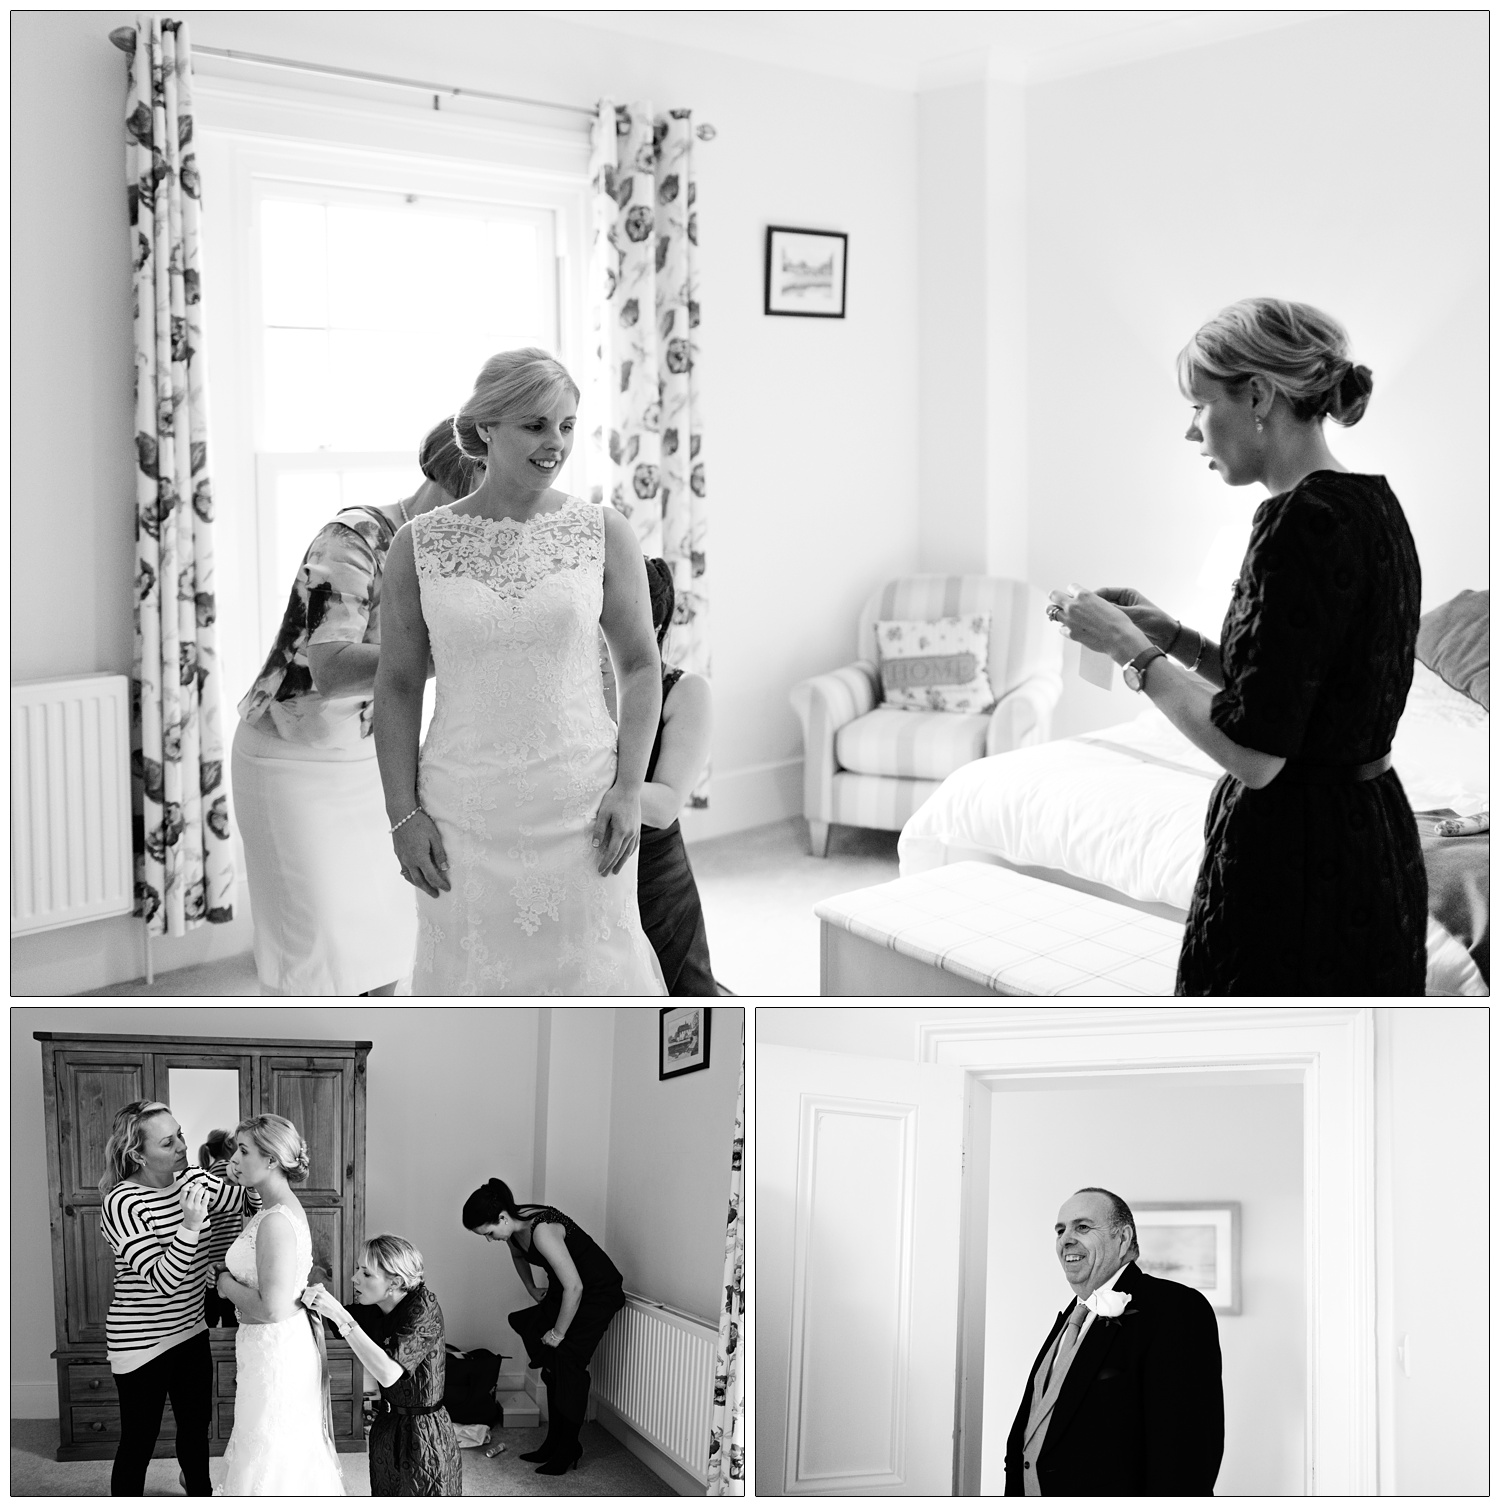 Moments from the bride dressing in a bedroom.